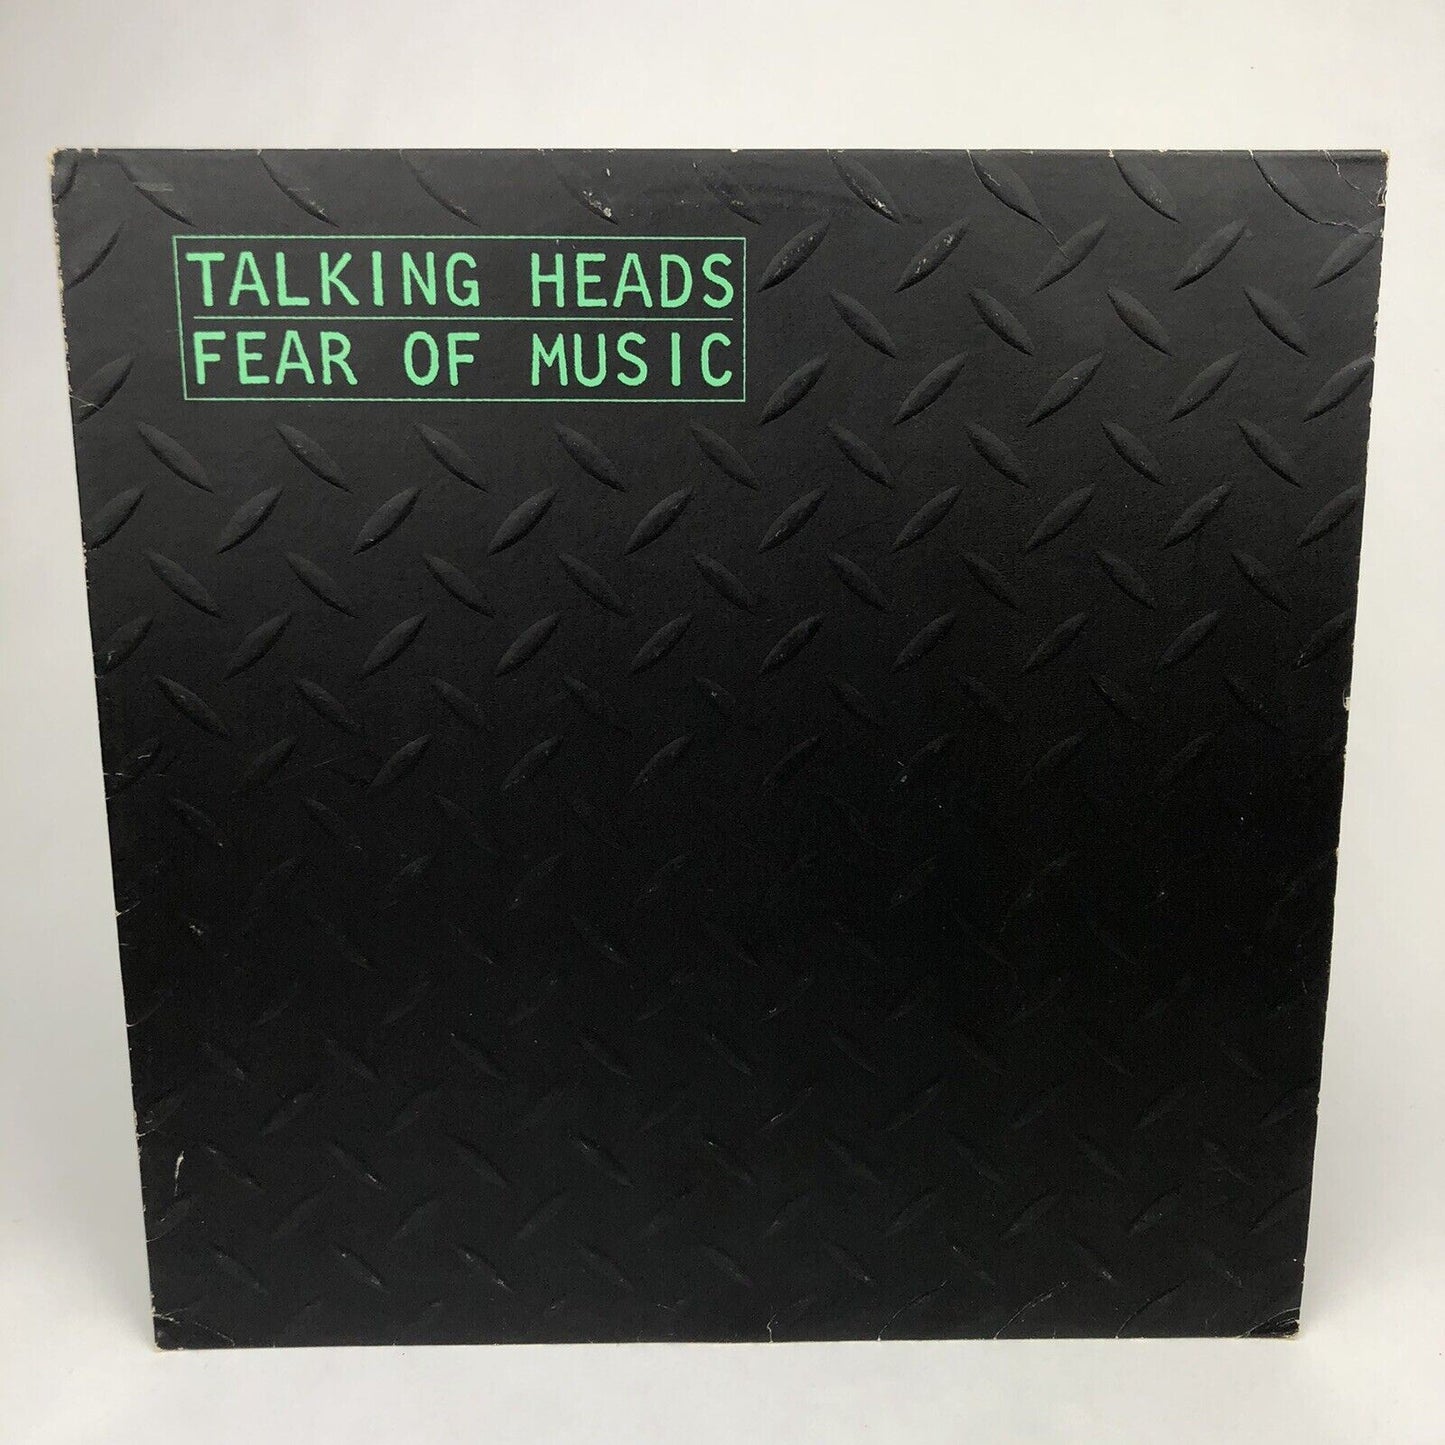 TALKING HEADS Fear of Music 1979 Embossed Cover SRK 6076 Sire LP 1st Sterling